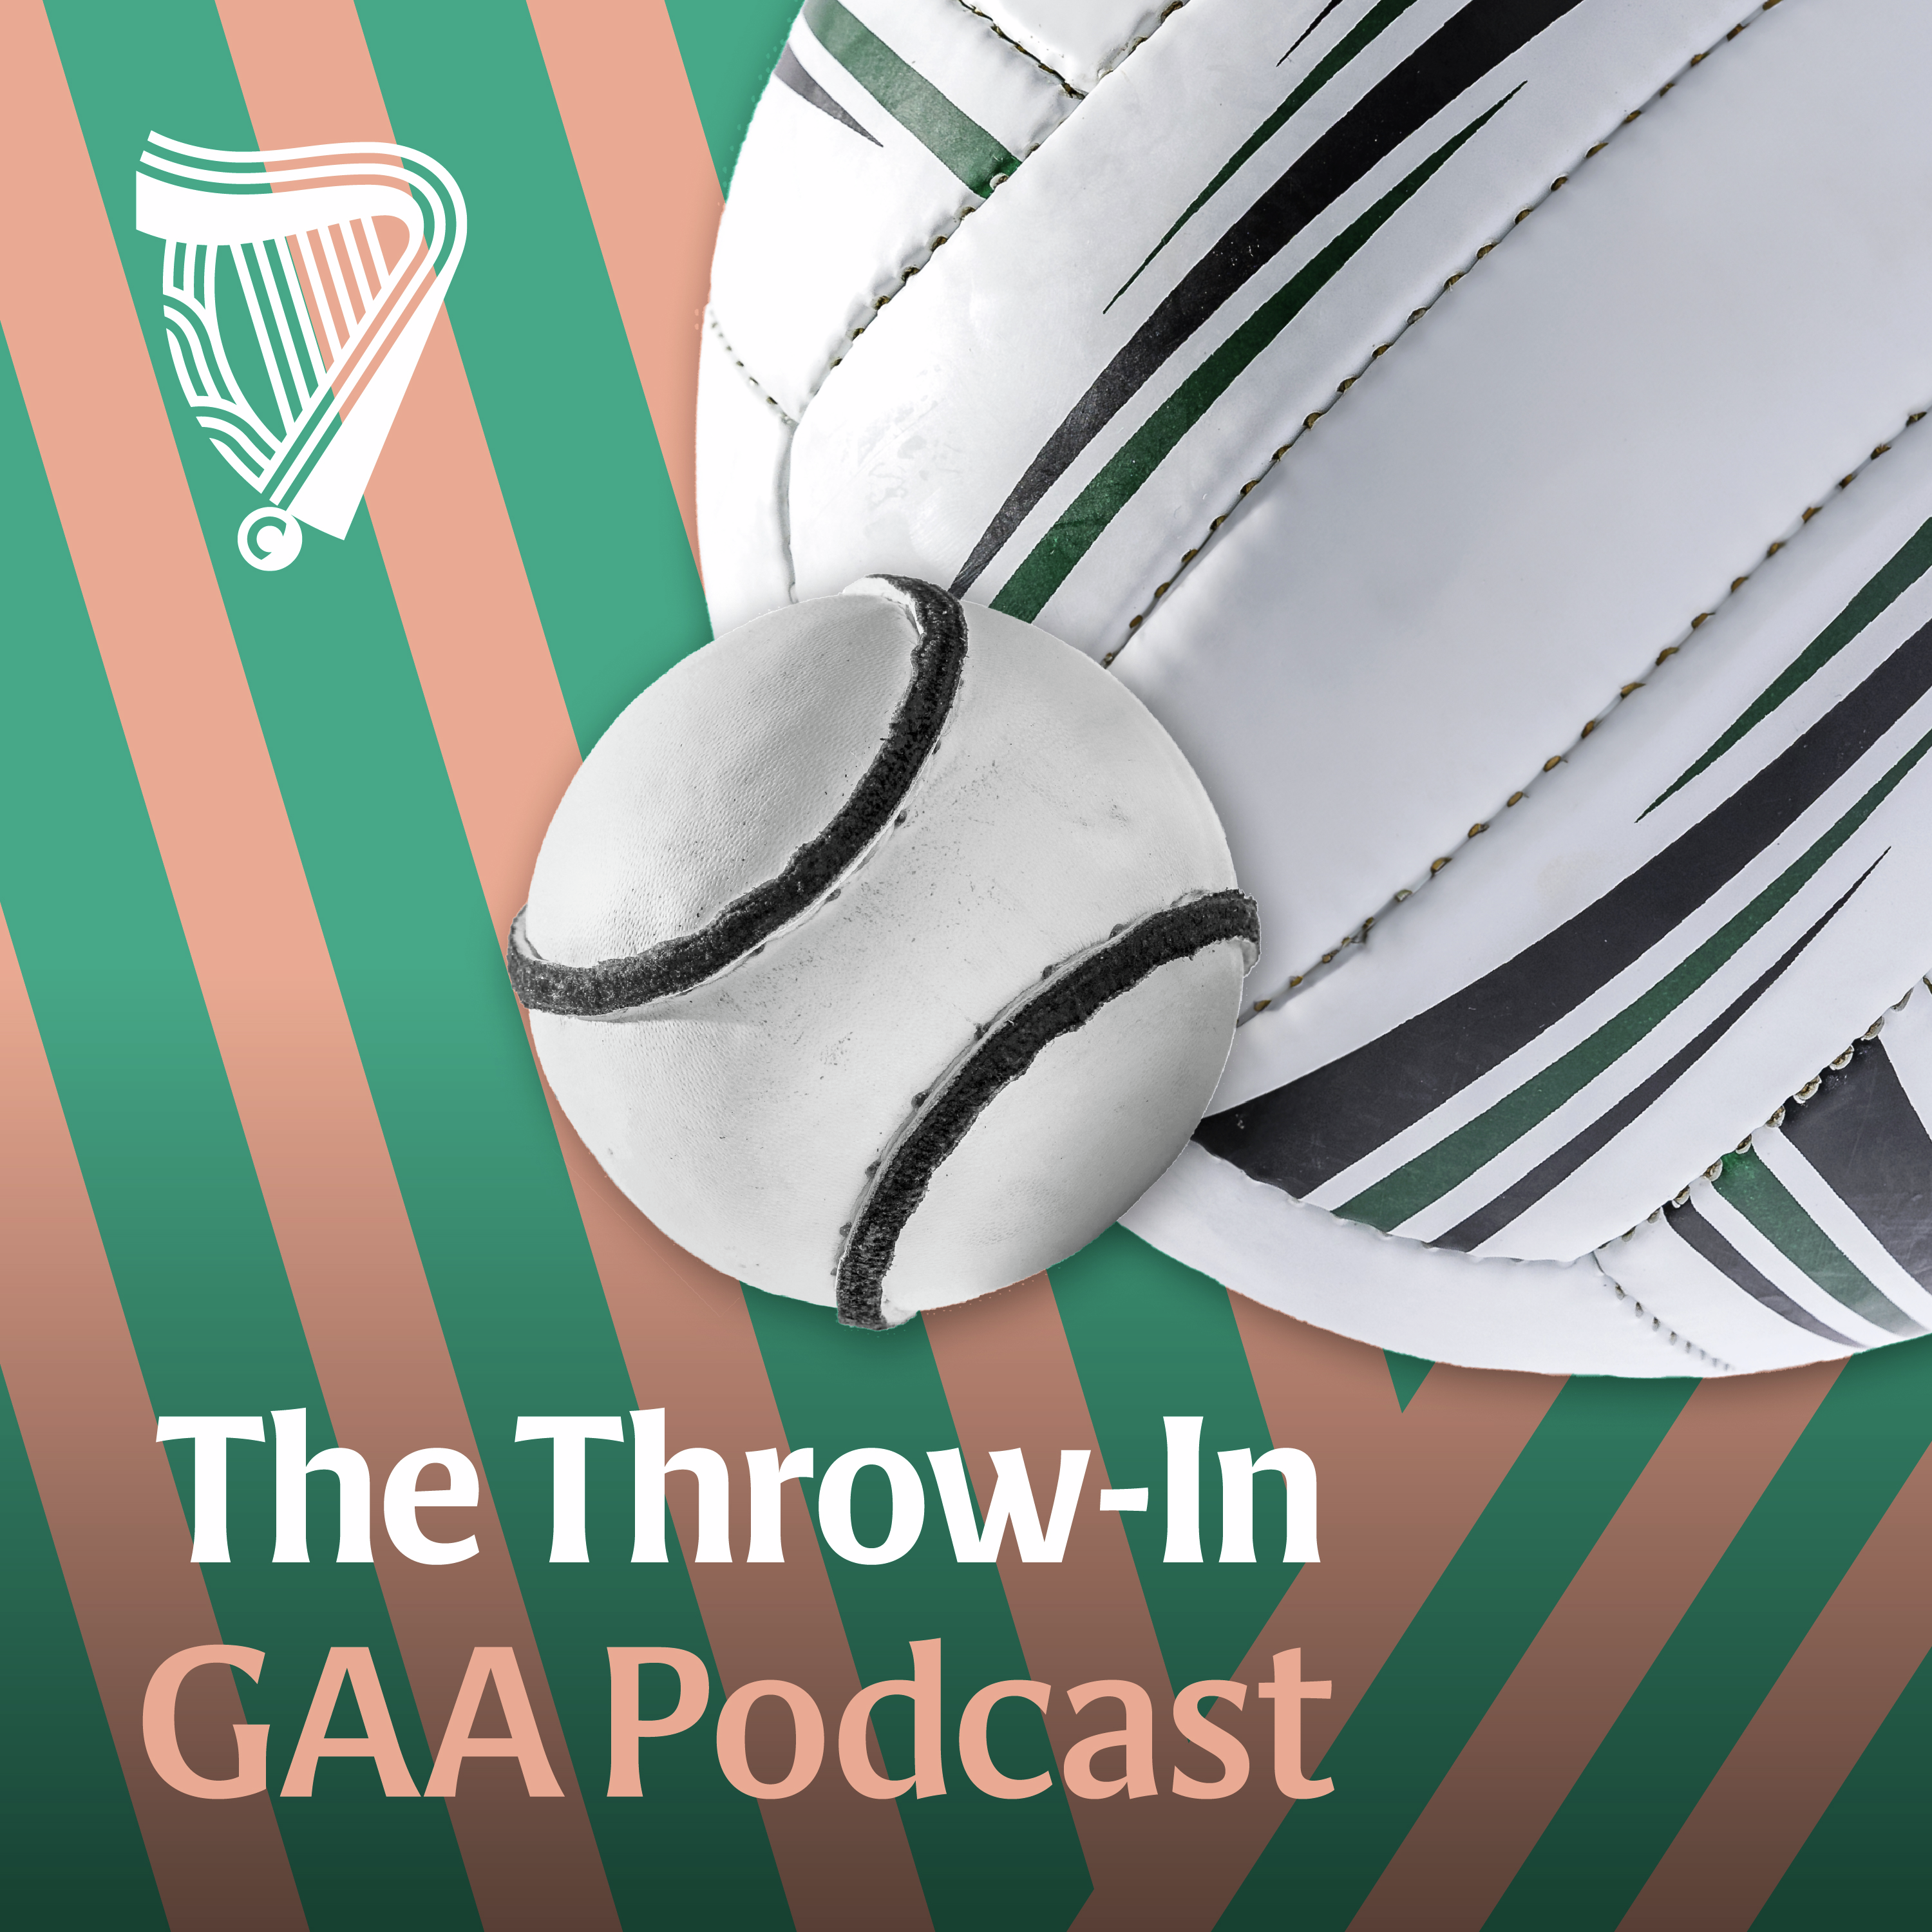 The Throw-In Football: One last dance for the Dubs?